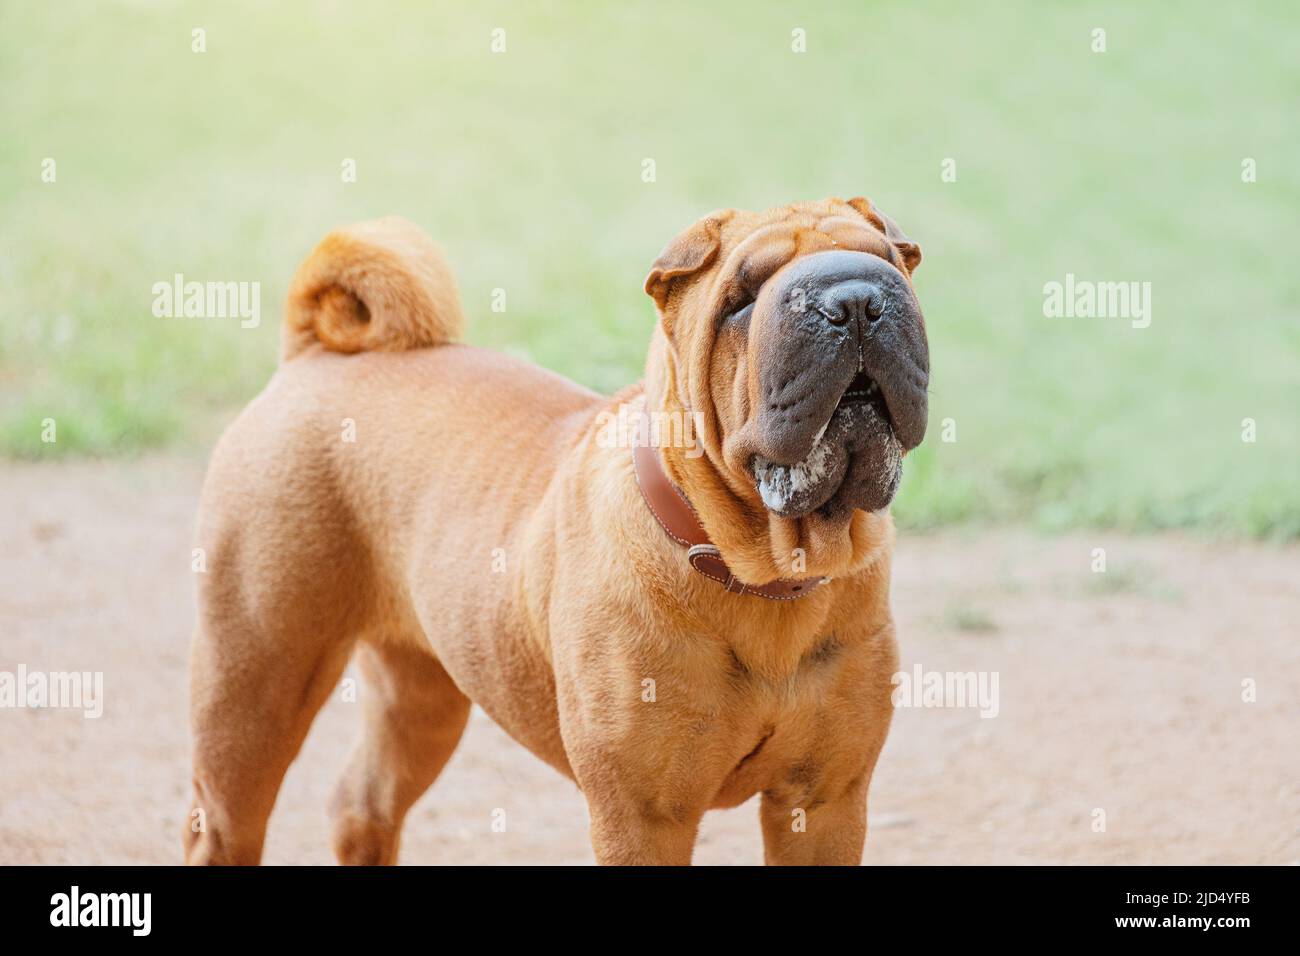 Shar Pei dog breed walking in park. Unusual and funny adorable pet from China. Adorable muzzle with numerous wrinkles and saliva secretions Stock Photo